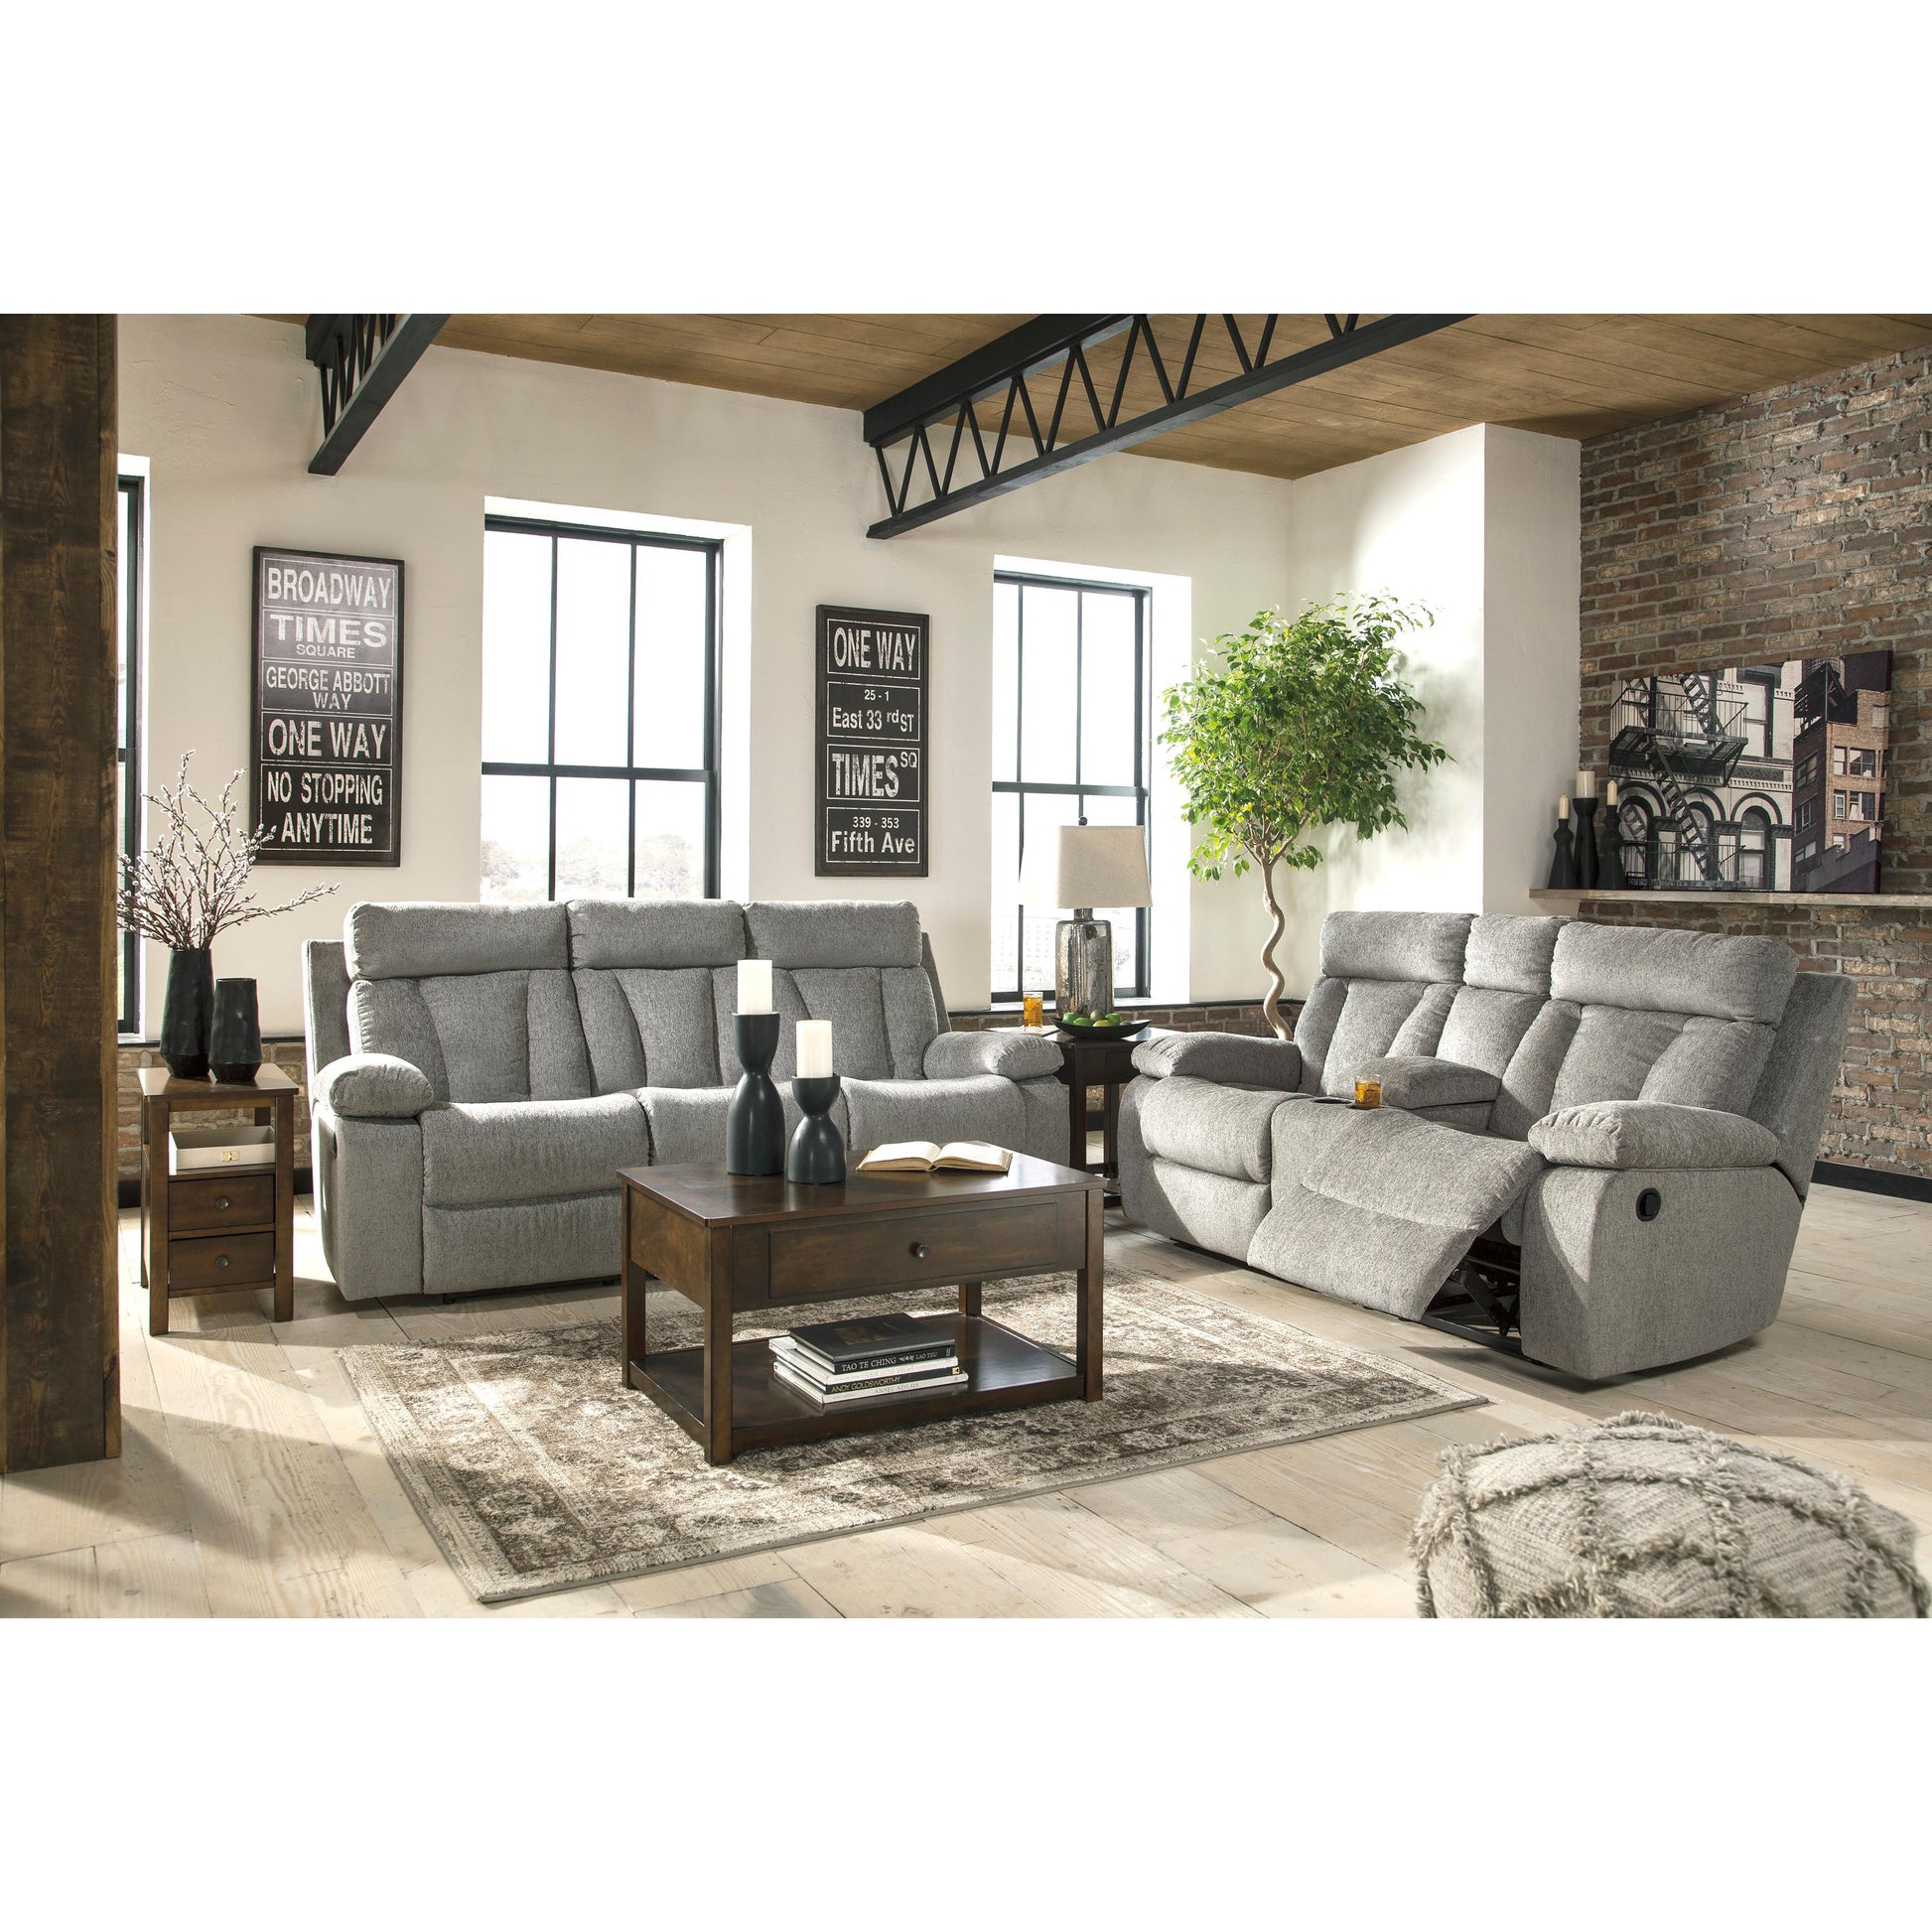 Signature Design by Ashley Mitchiner Reclining Fabric Loveseat 7620494